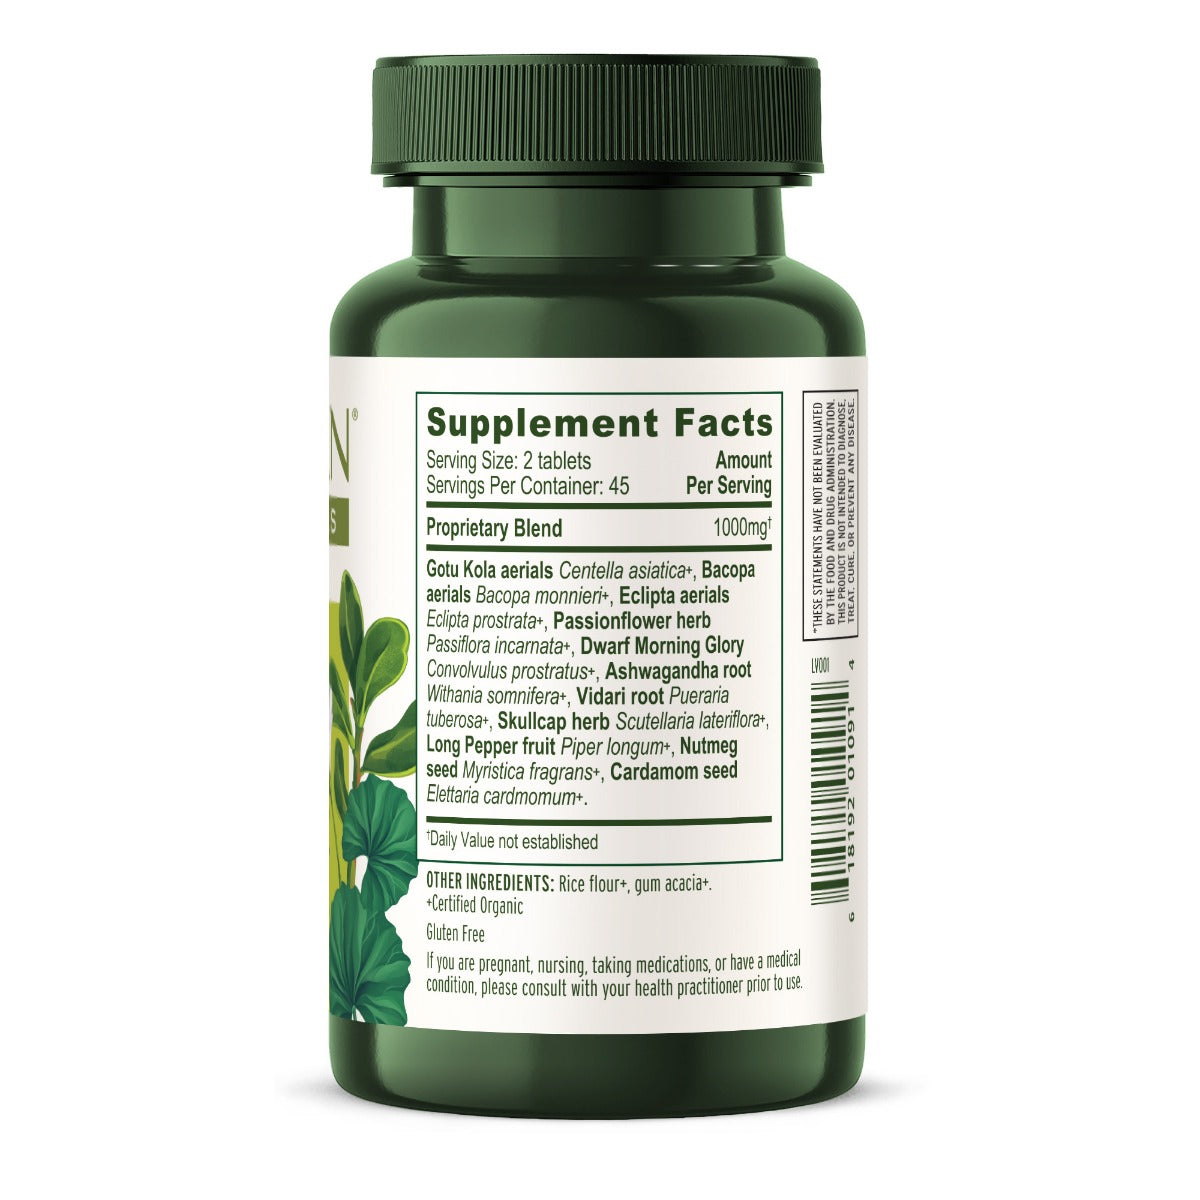 Mental Clarity tablets Supplement Facts Panel